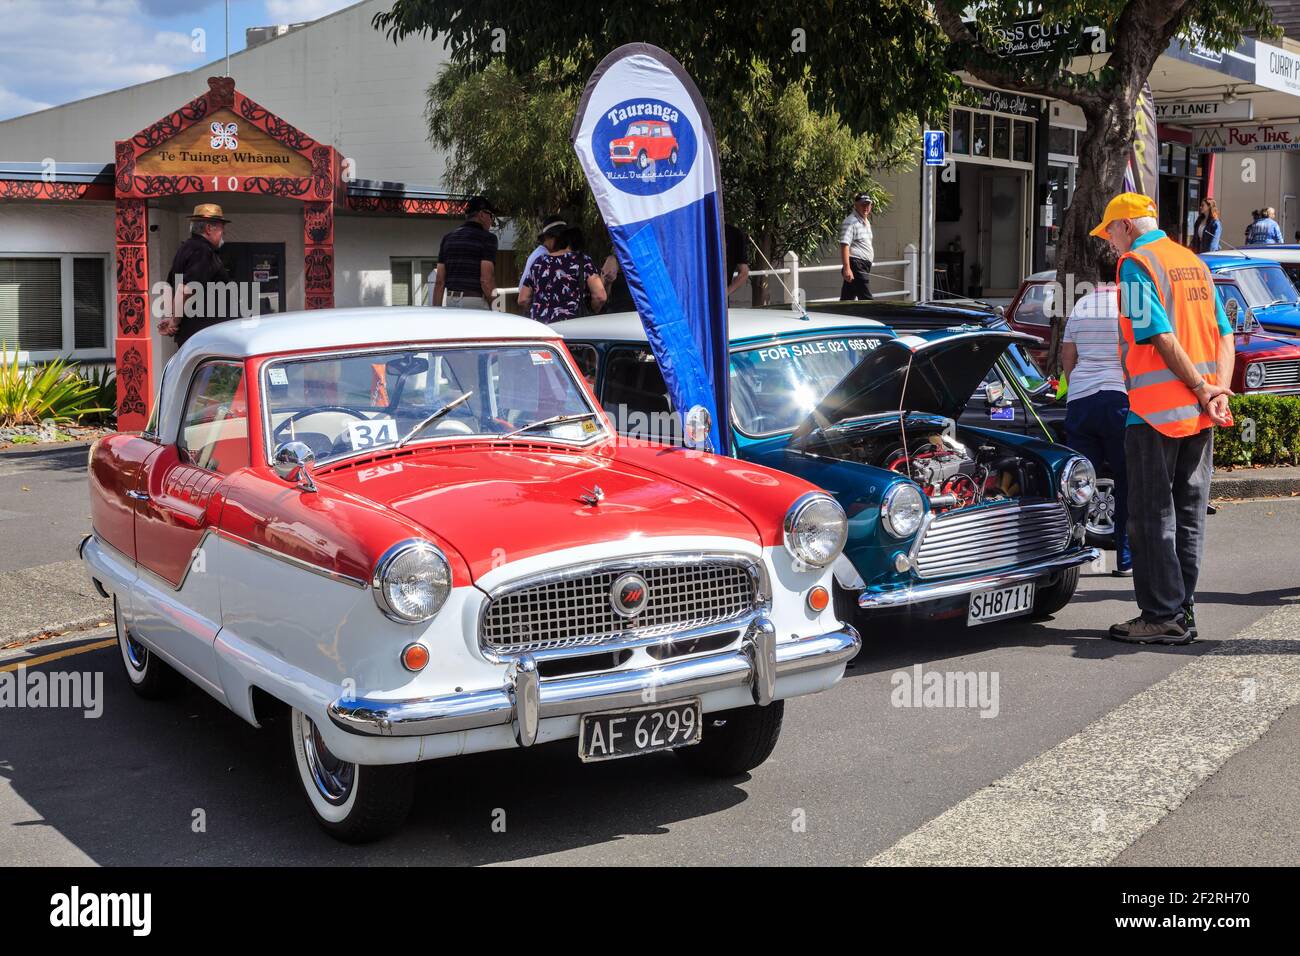 A pair of classic cars, a 1958 Austin Metropolitan and a 1981 Morris Mini, side by side at an outdoor car show Stock Photo